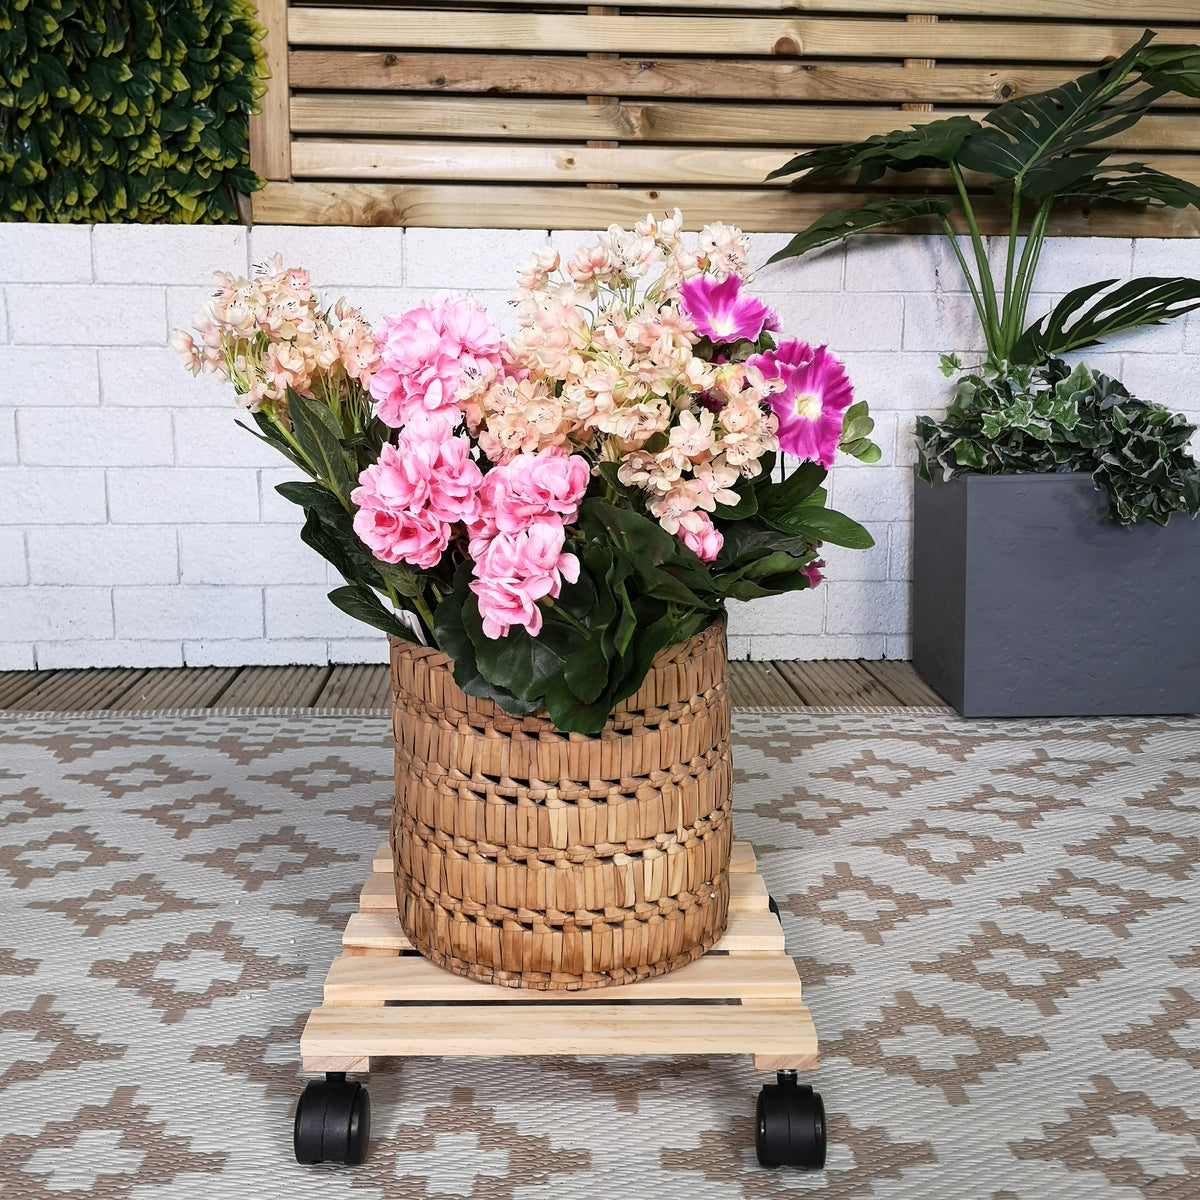 28cm Square Wooden Garden Plant Pot Flower Trolley Stand On Wheels